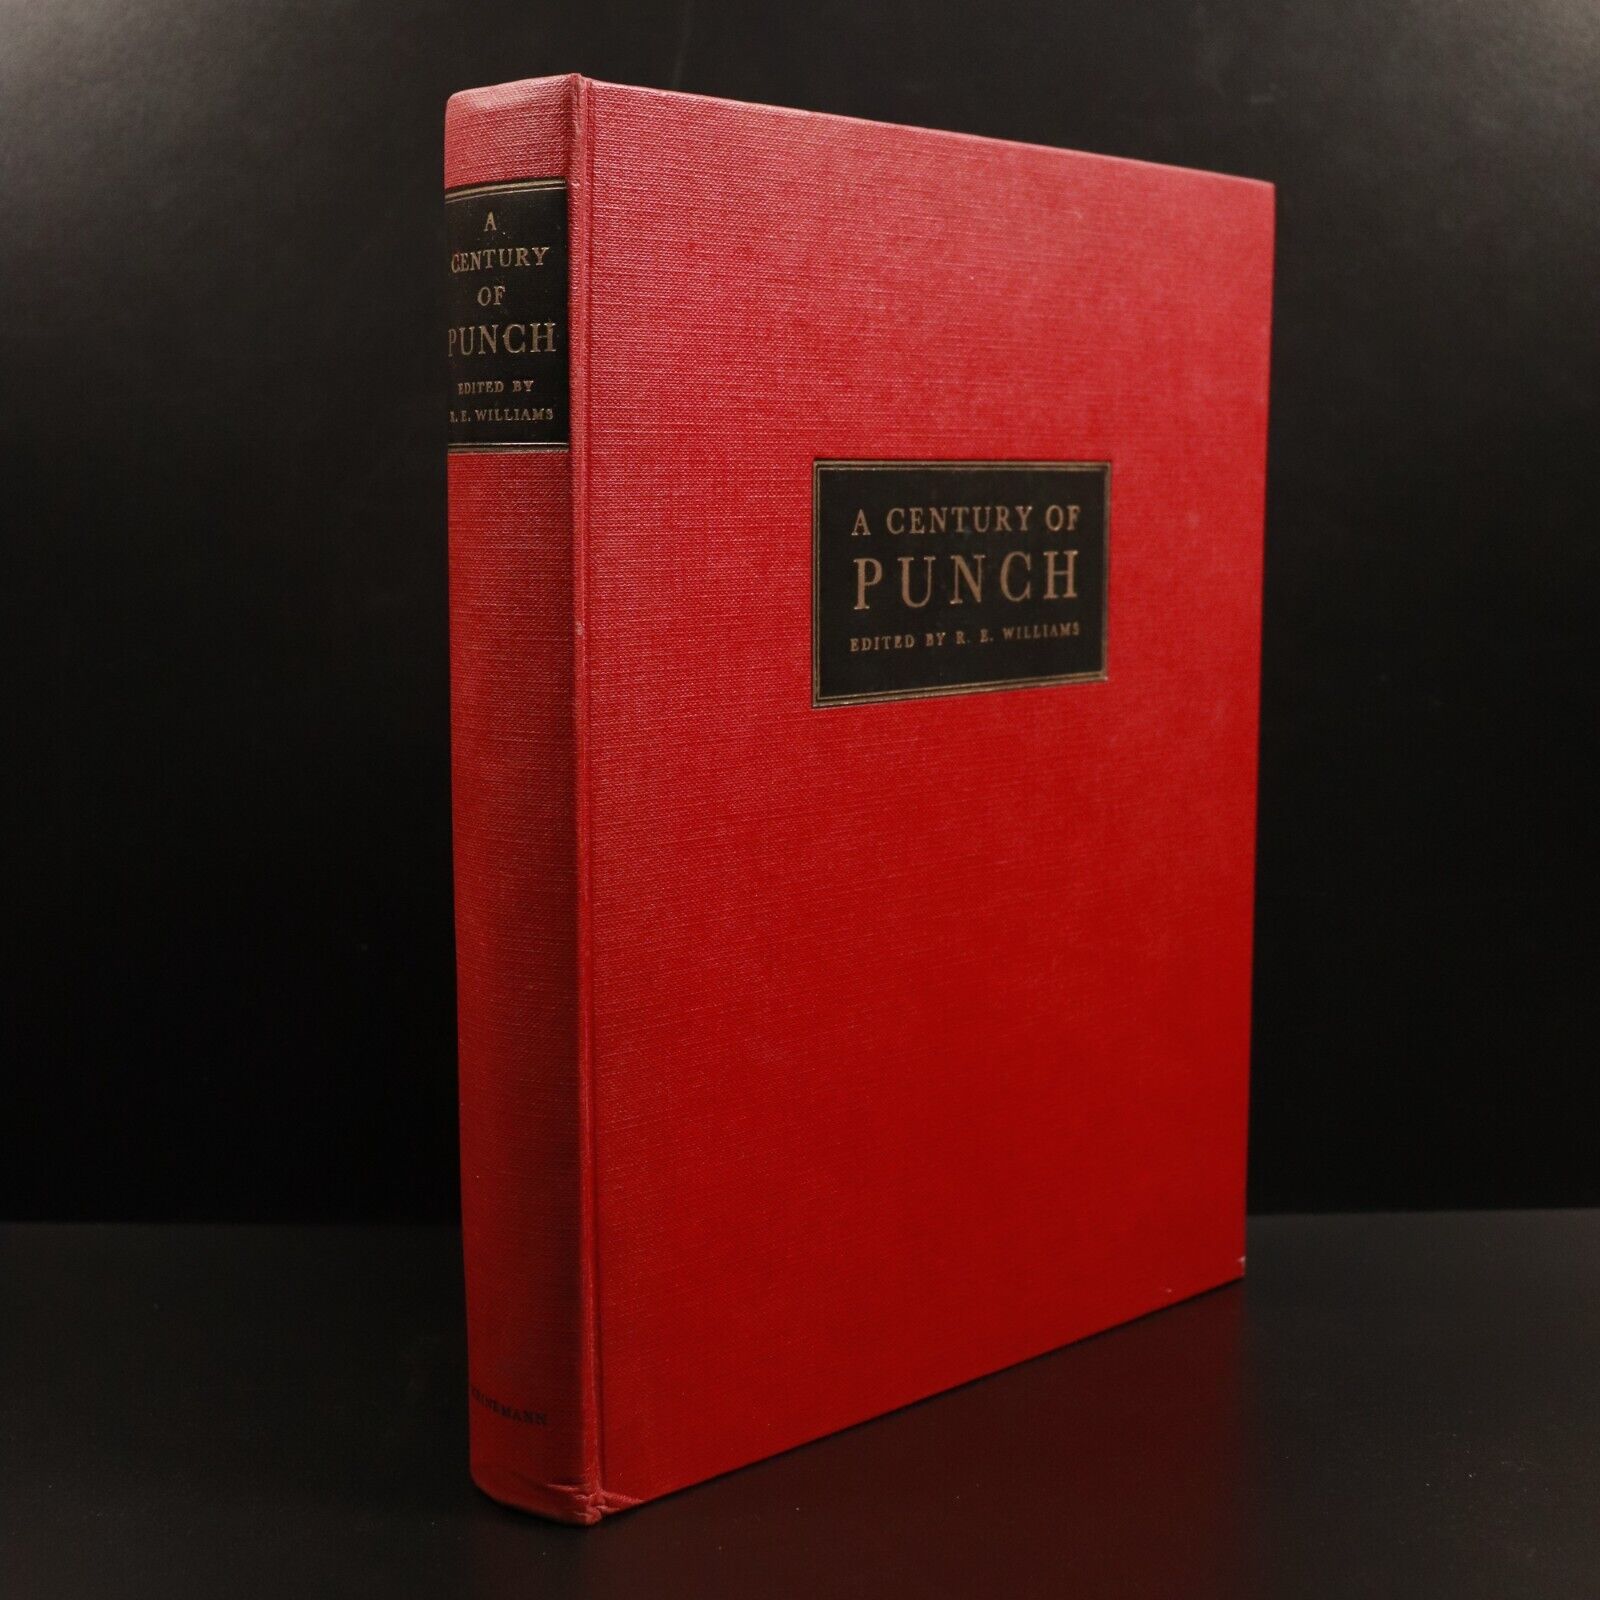 1956 A Century Of Punch Edited by R.E. Williams Vintage Literature Book